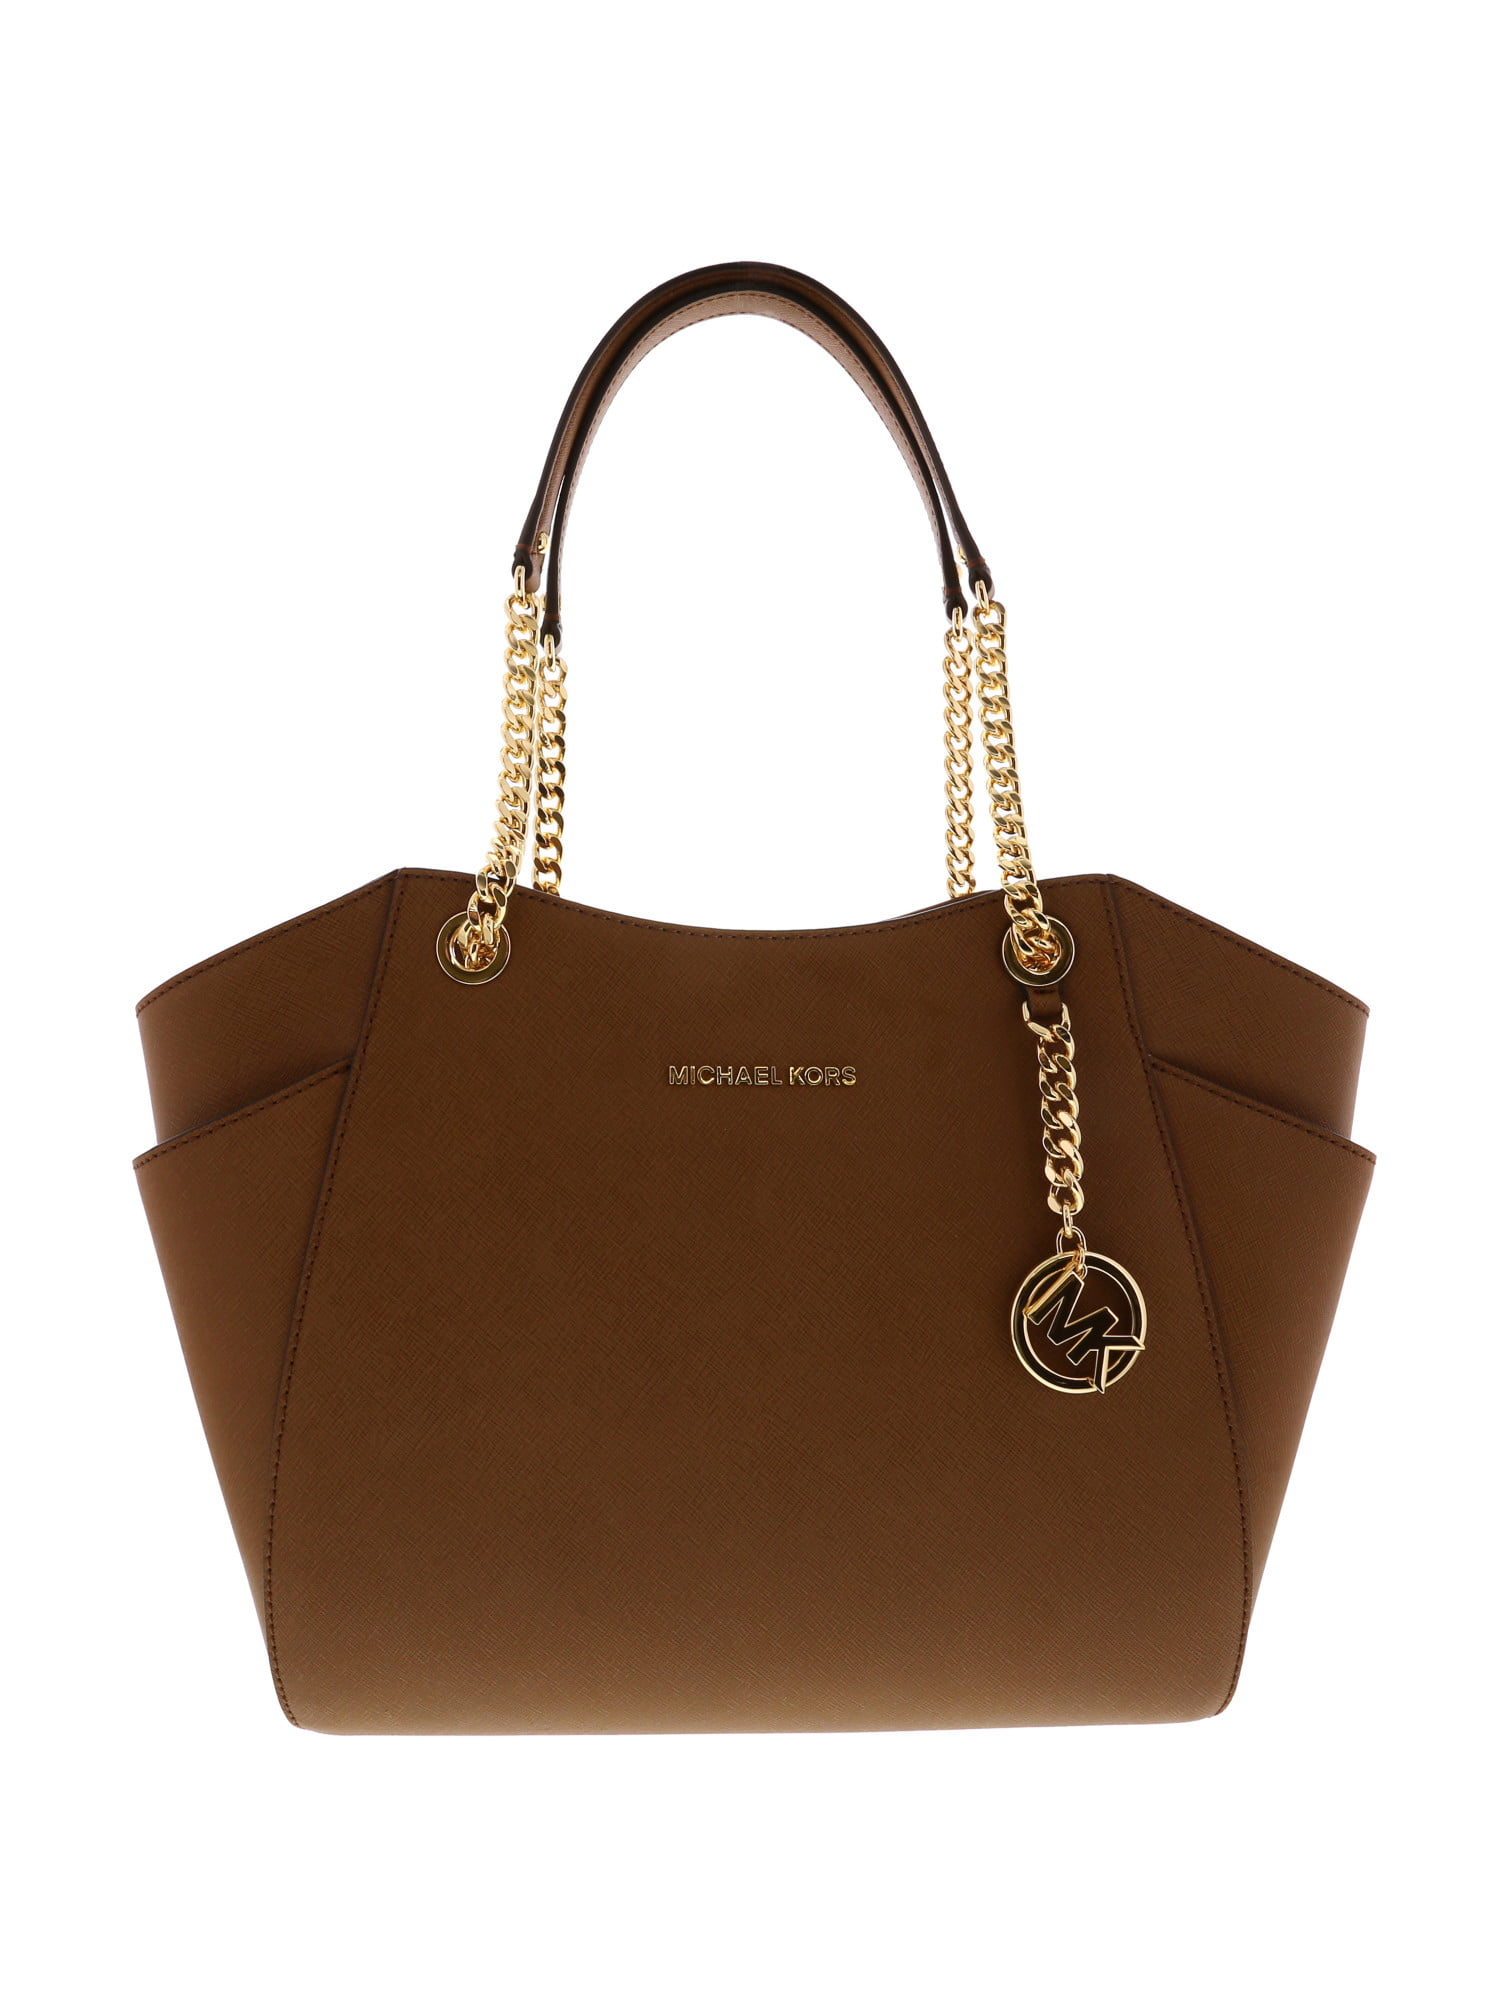 michael kors purses brown and gold